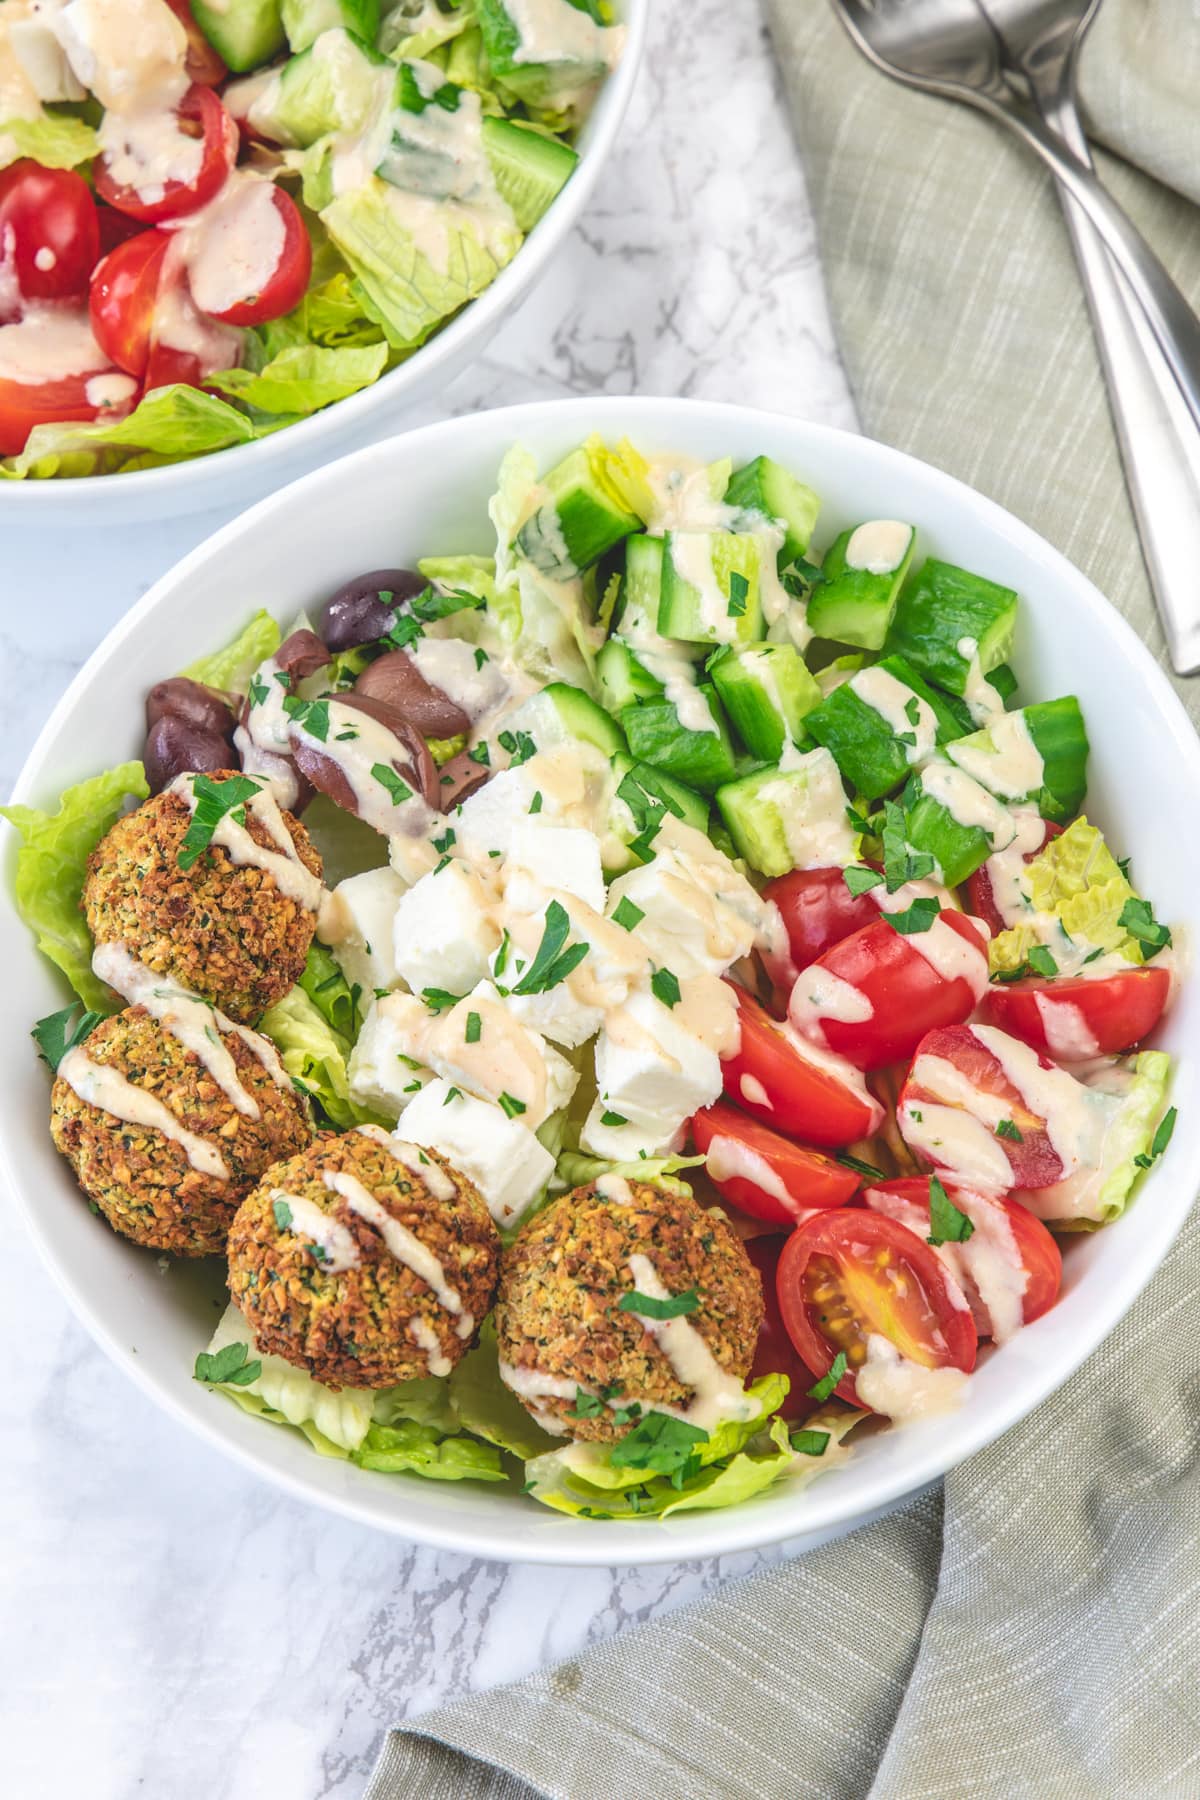 Falafel salad bowl with a drizzle of tahini sauce.